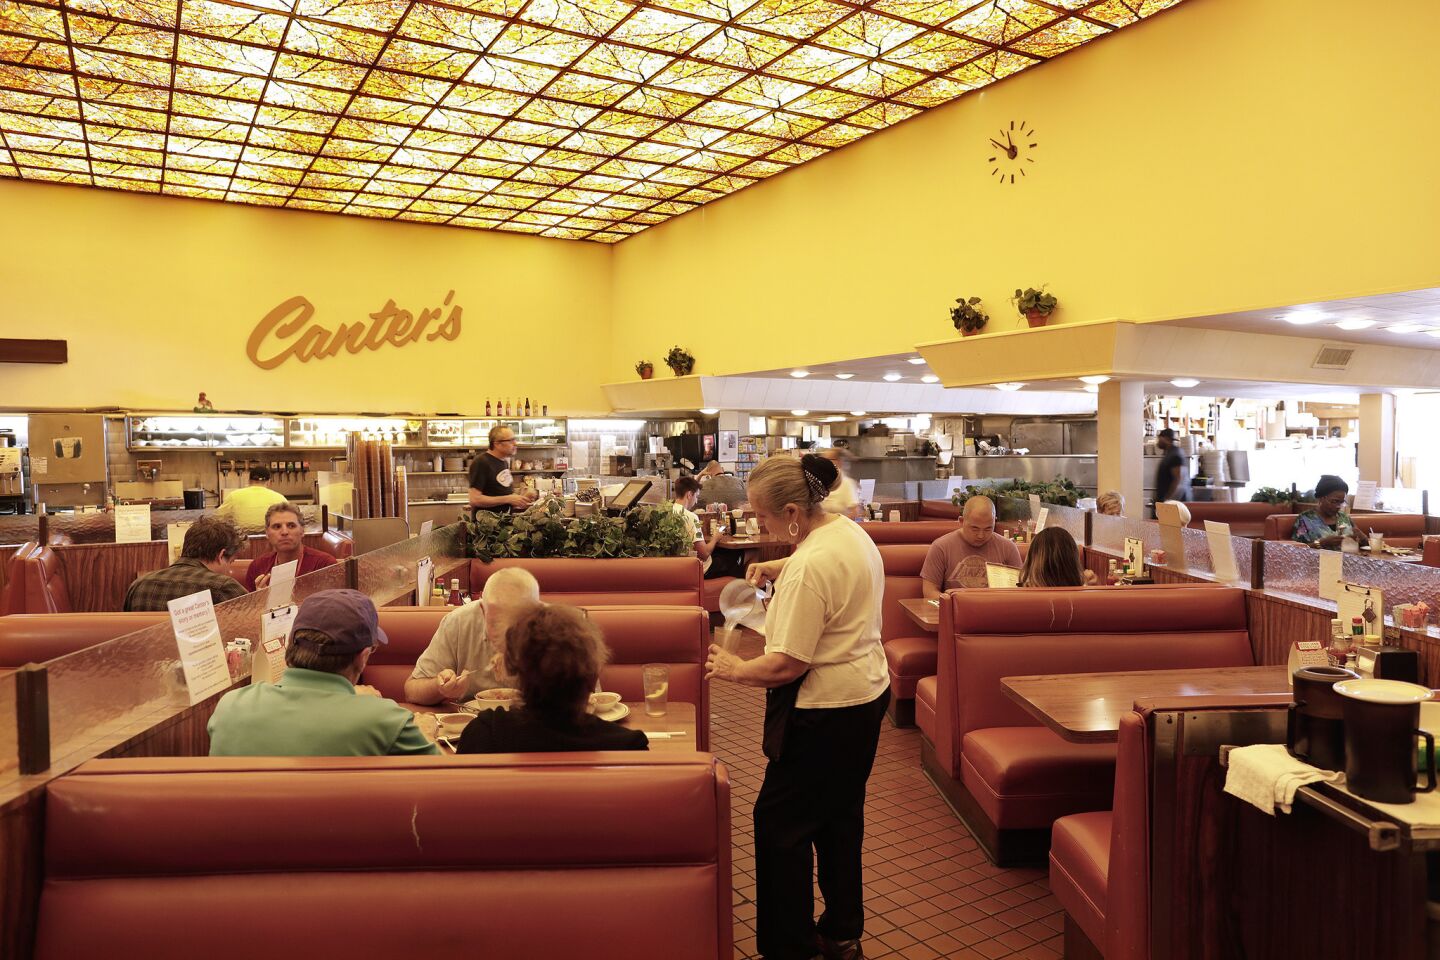 Canter's on Fairfax Avenue has been a family-owned business for four generations.